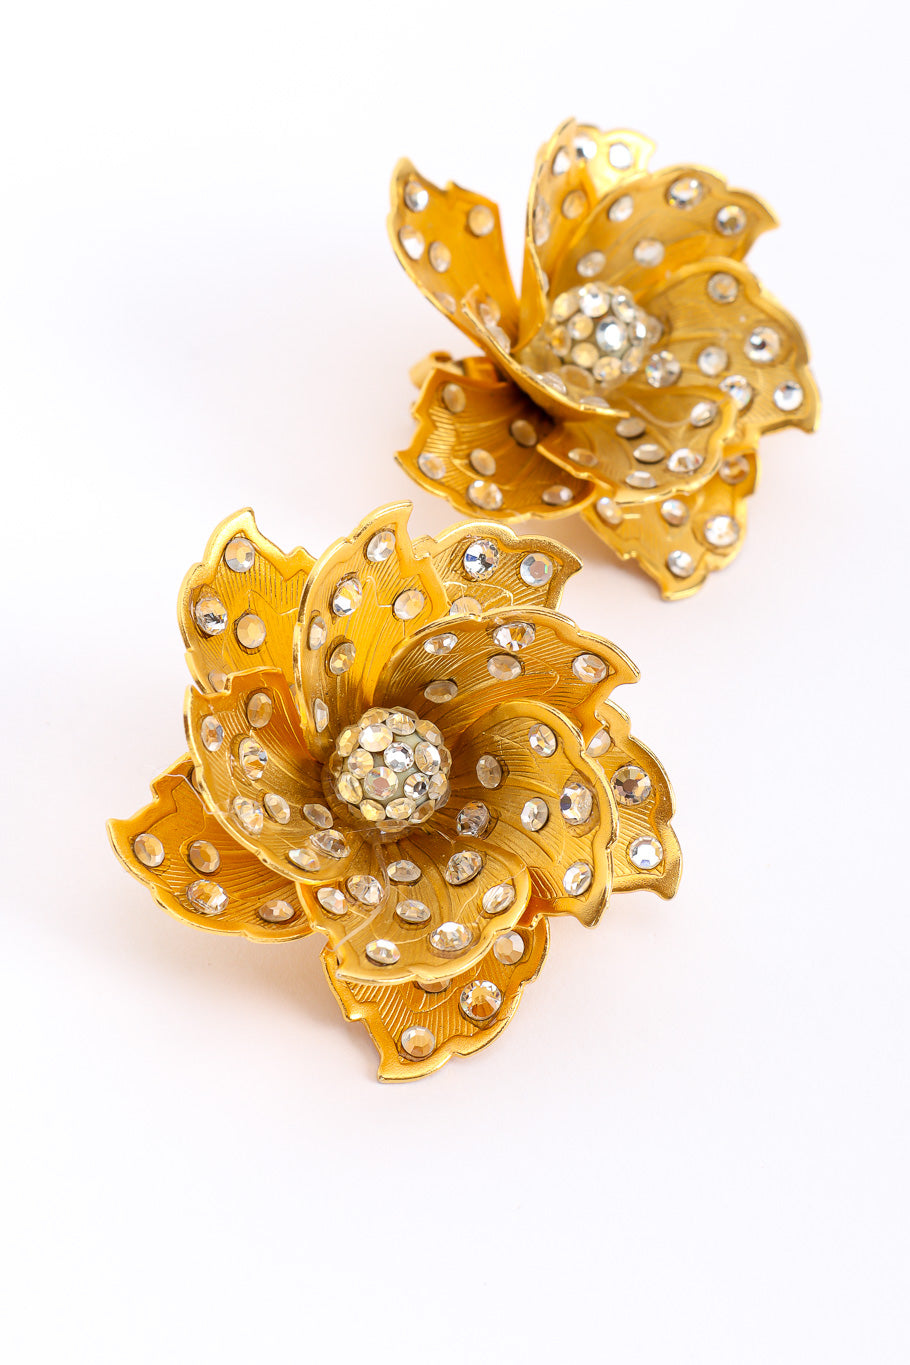 Sculpted flower earrings by James Arpad on white background close @recessla